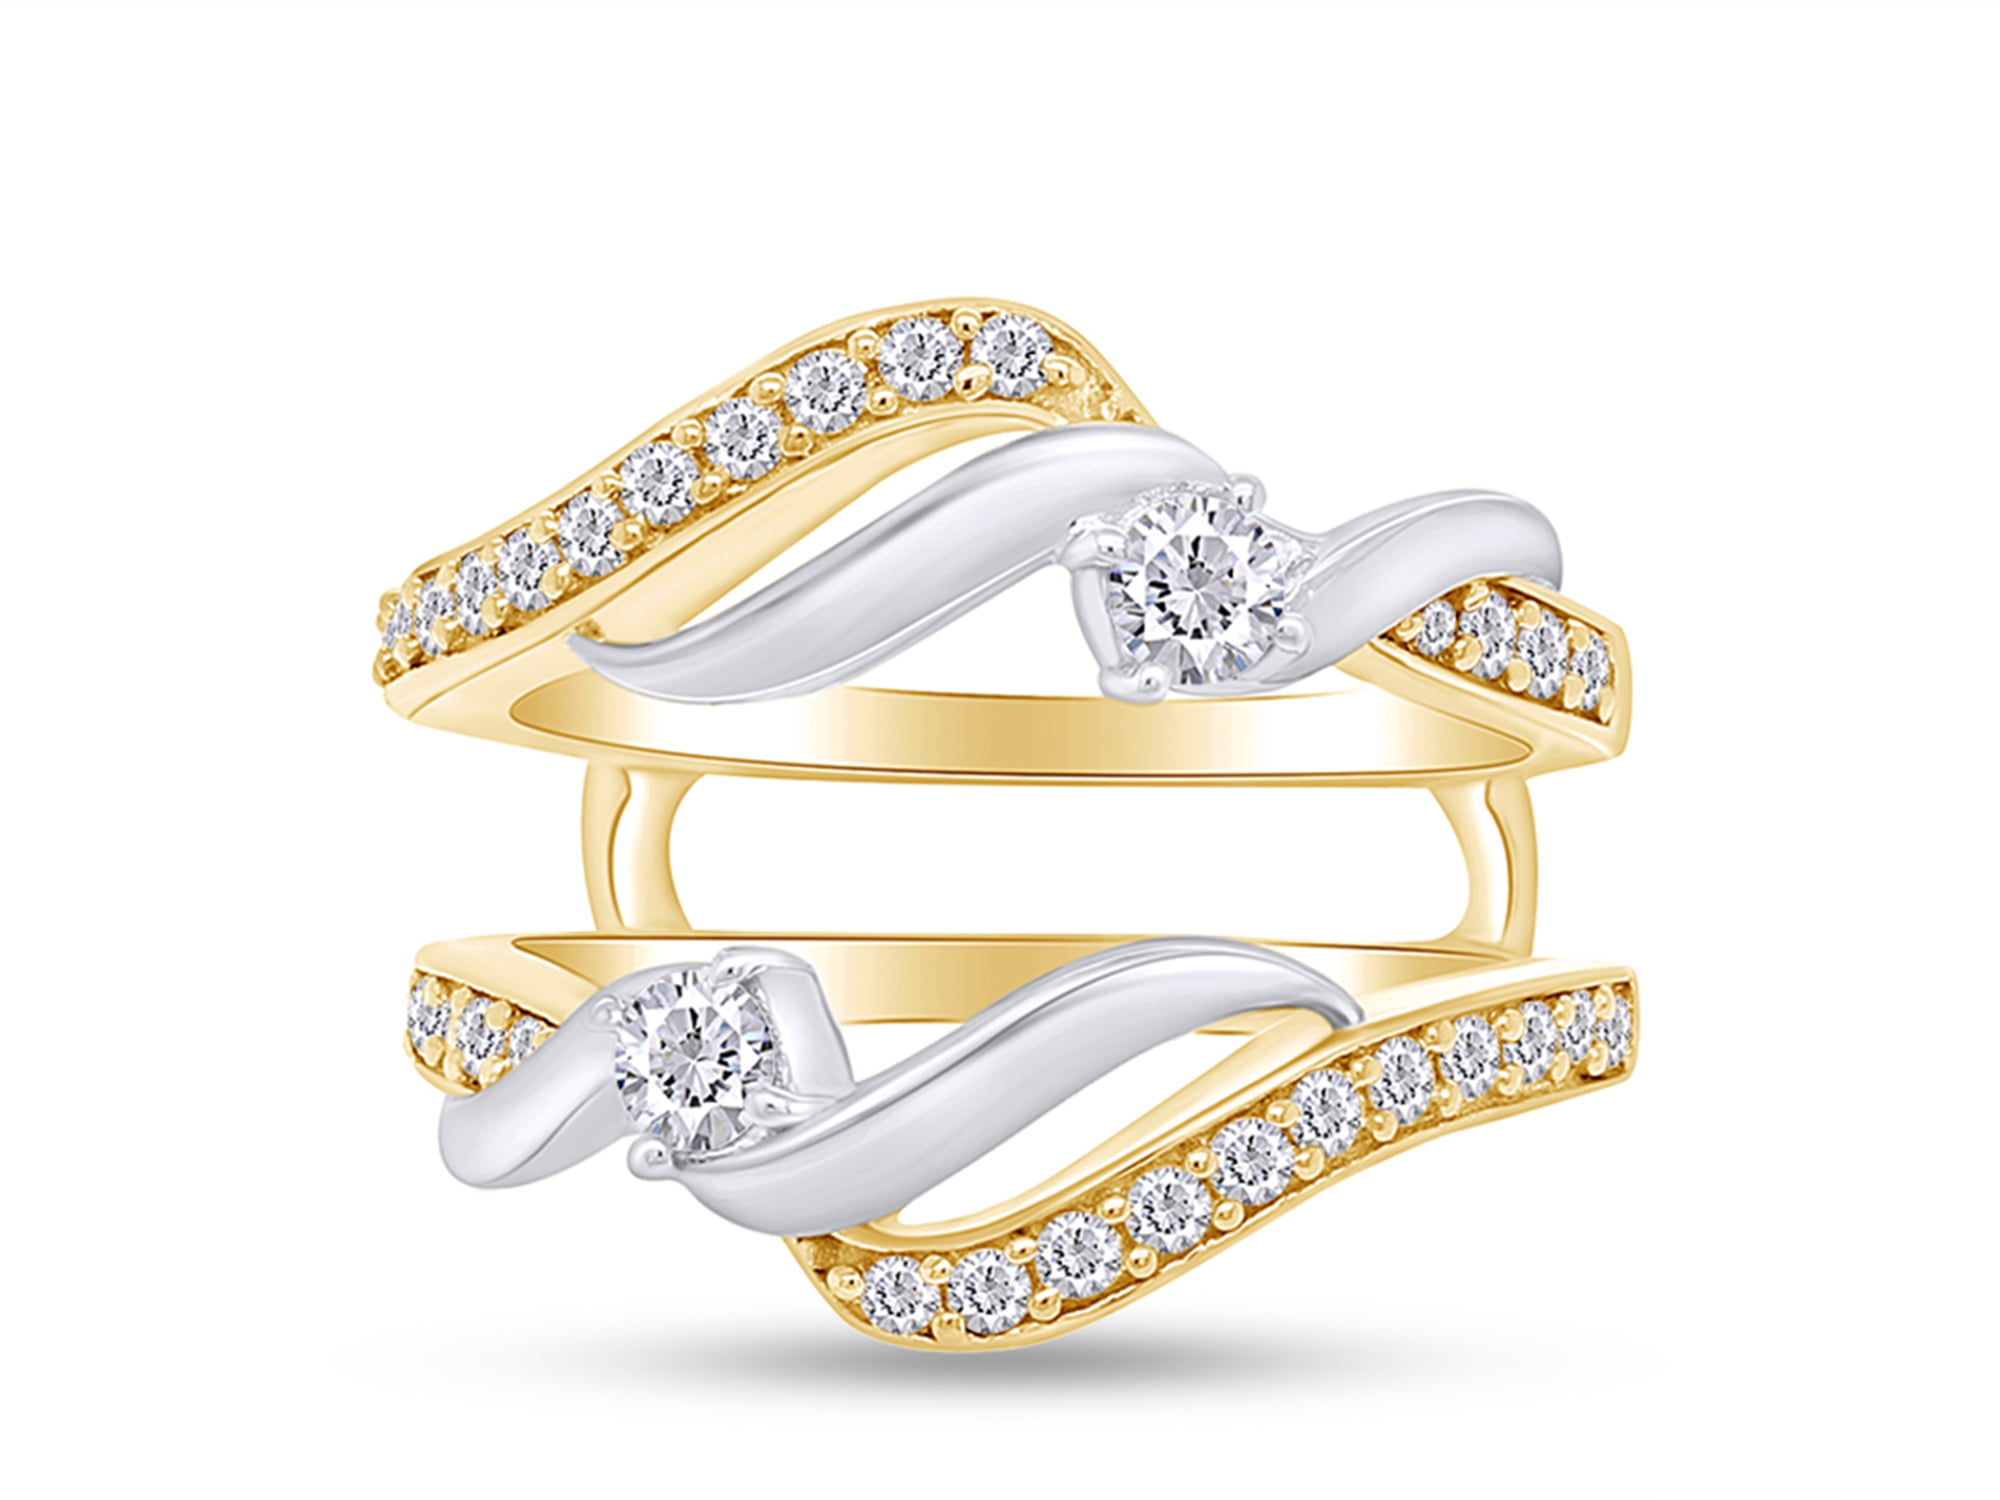 Buy Round Lab Grown White Diamond Chevron Double Enhancer Guard Two Tone  Wedding Ring Band for Women (0.50 ctw, Color H-I, Clarity SI2) in 14K  Yellow